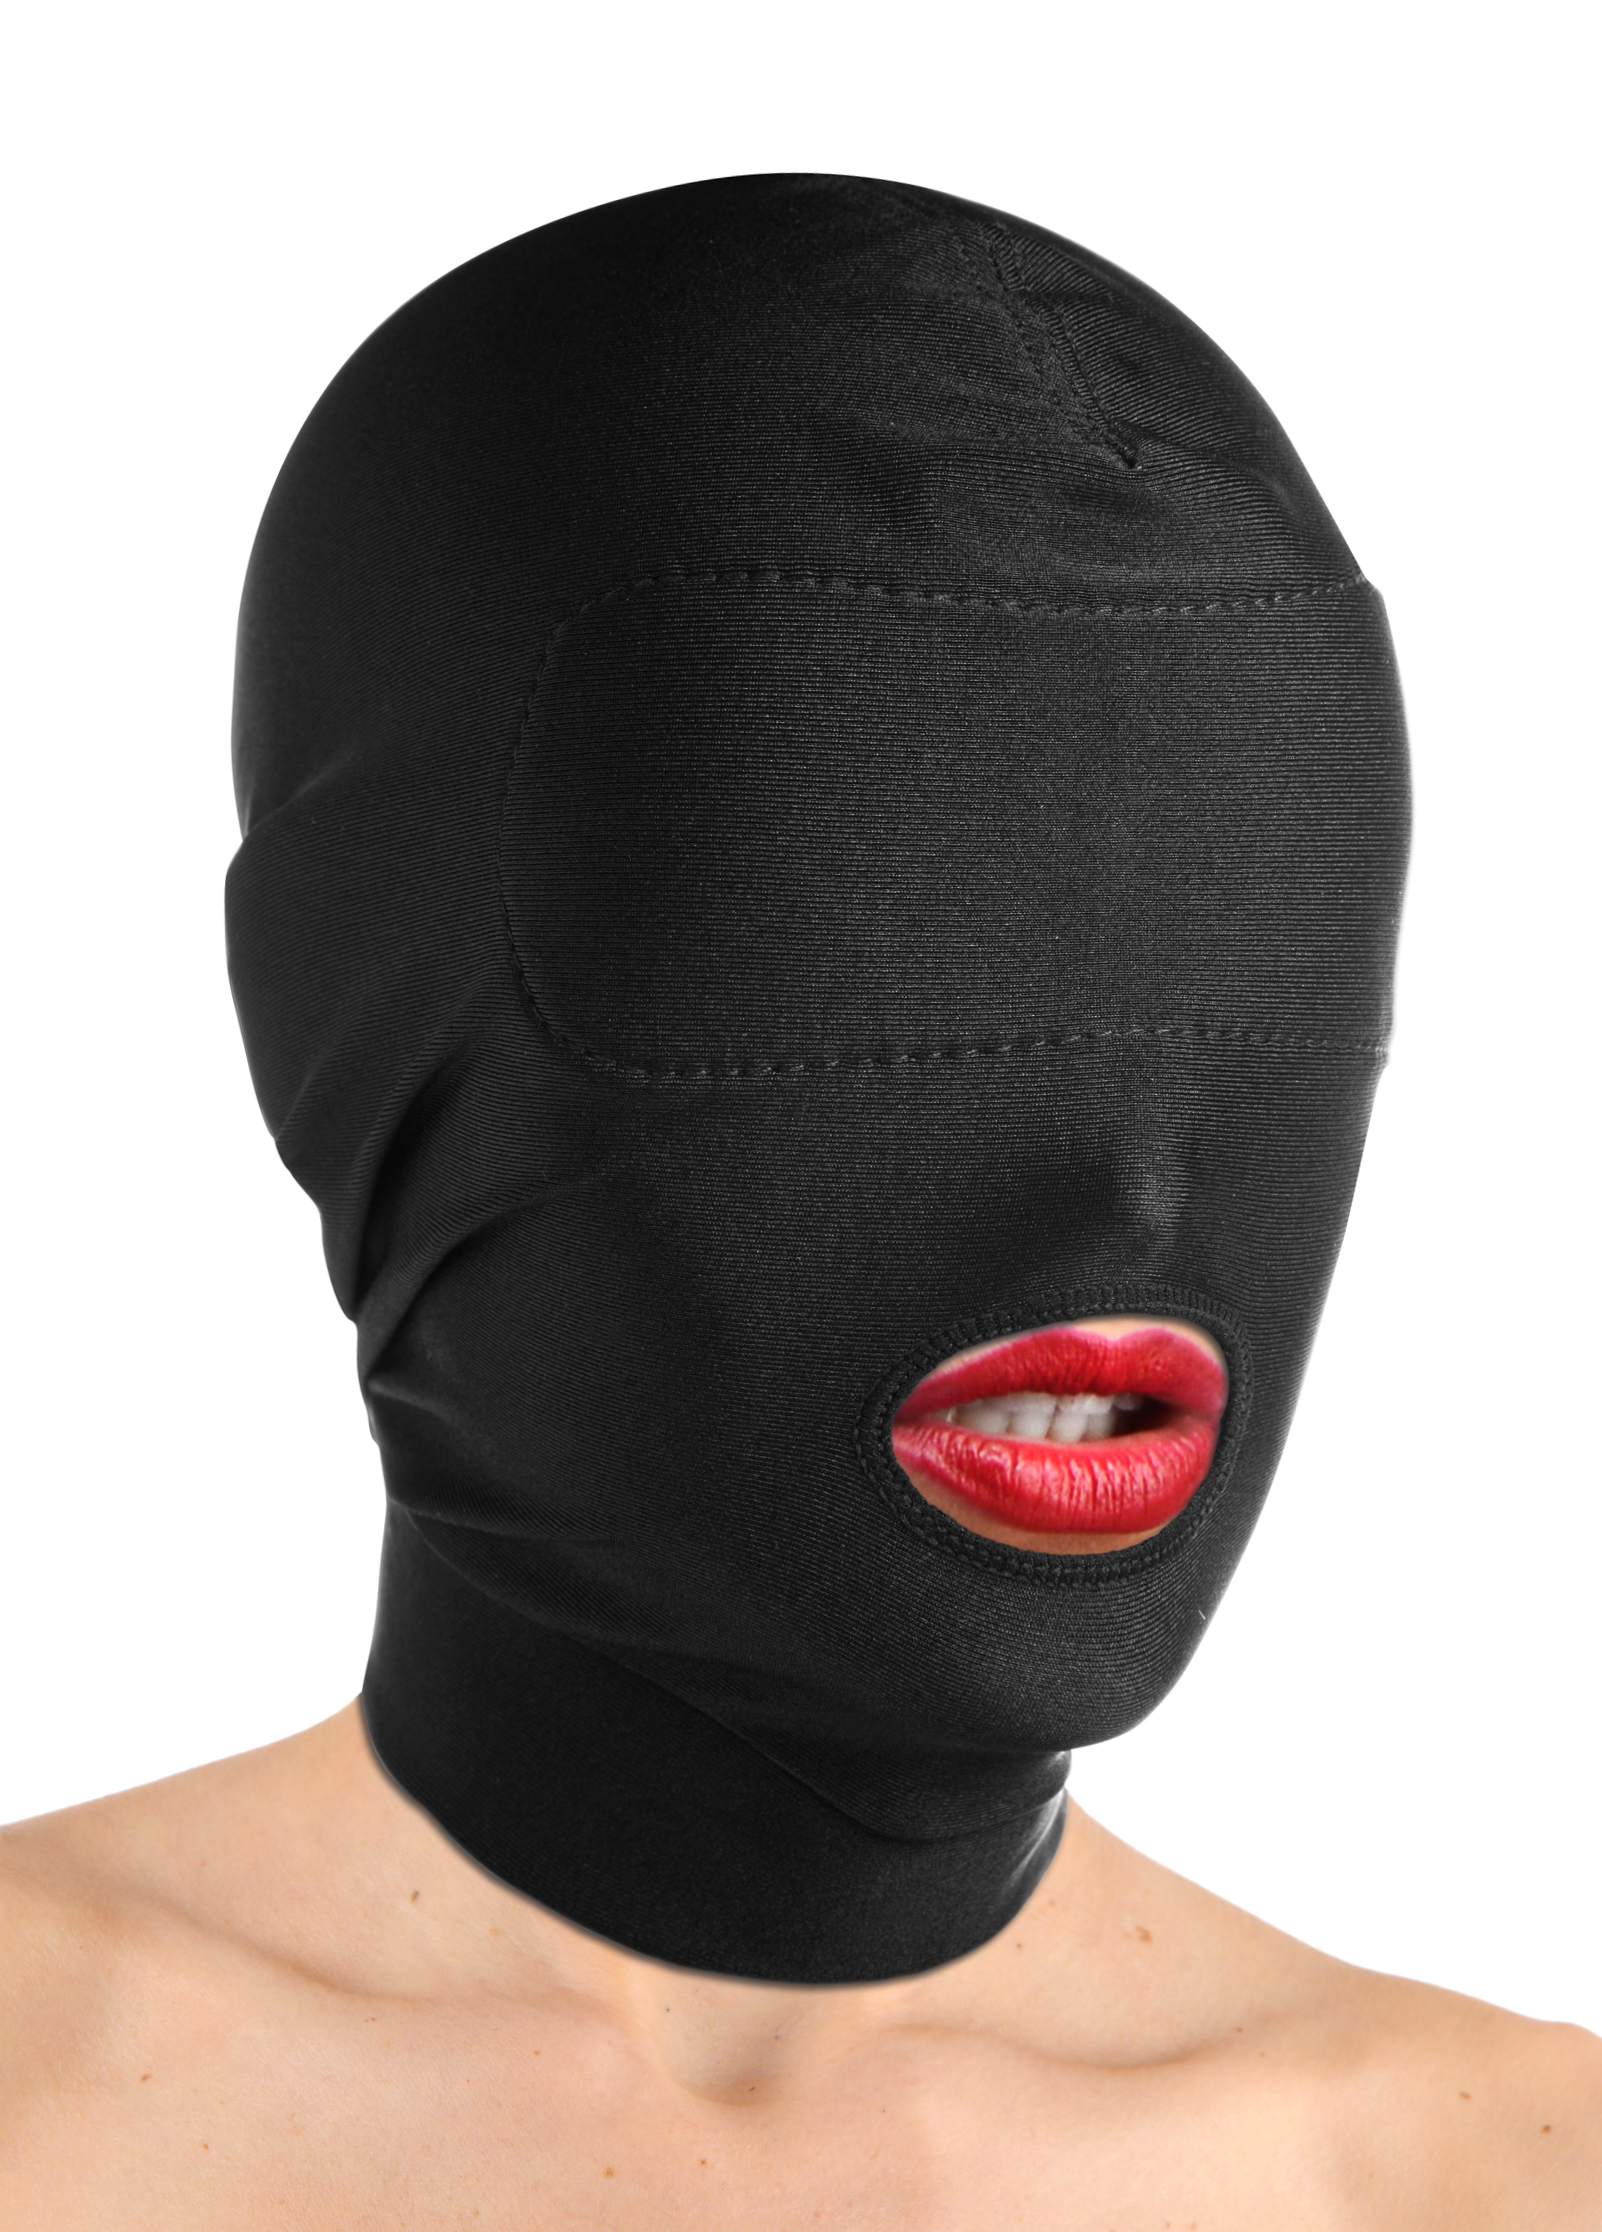 MASTER SERIES DISGUISE OPEN MOUTH HOOD - XRAE167